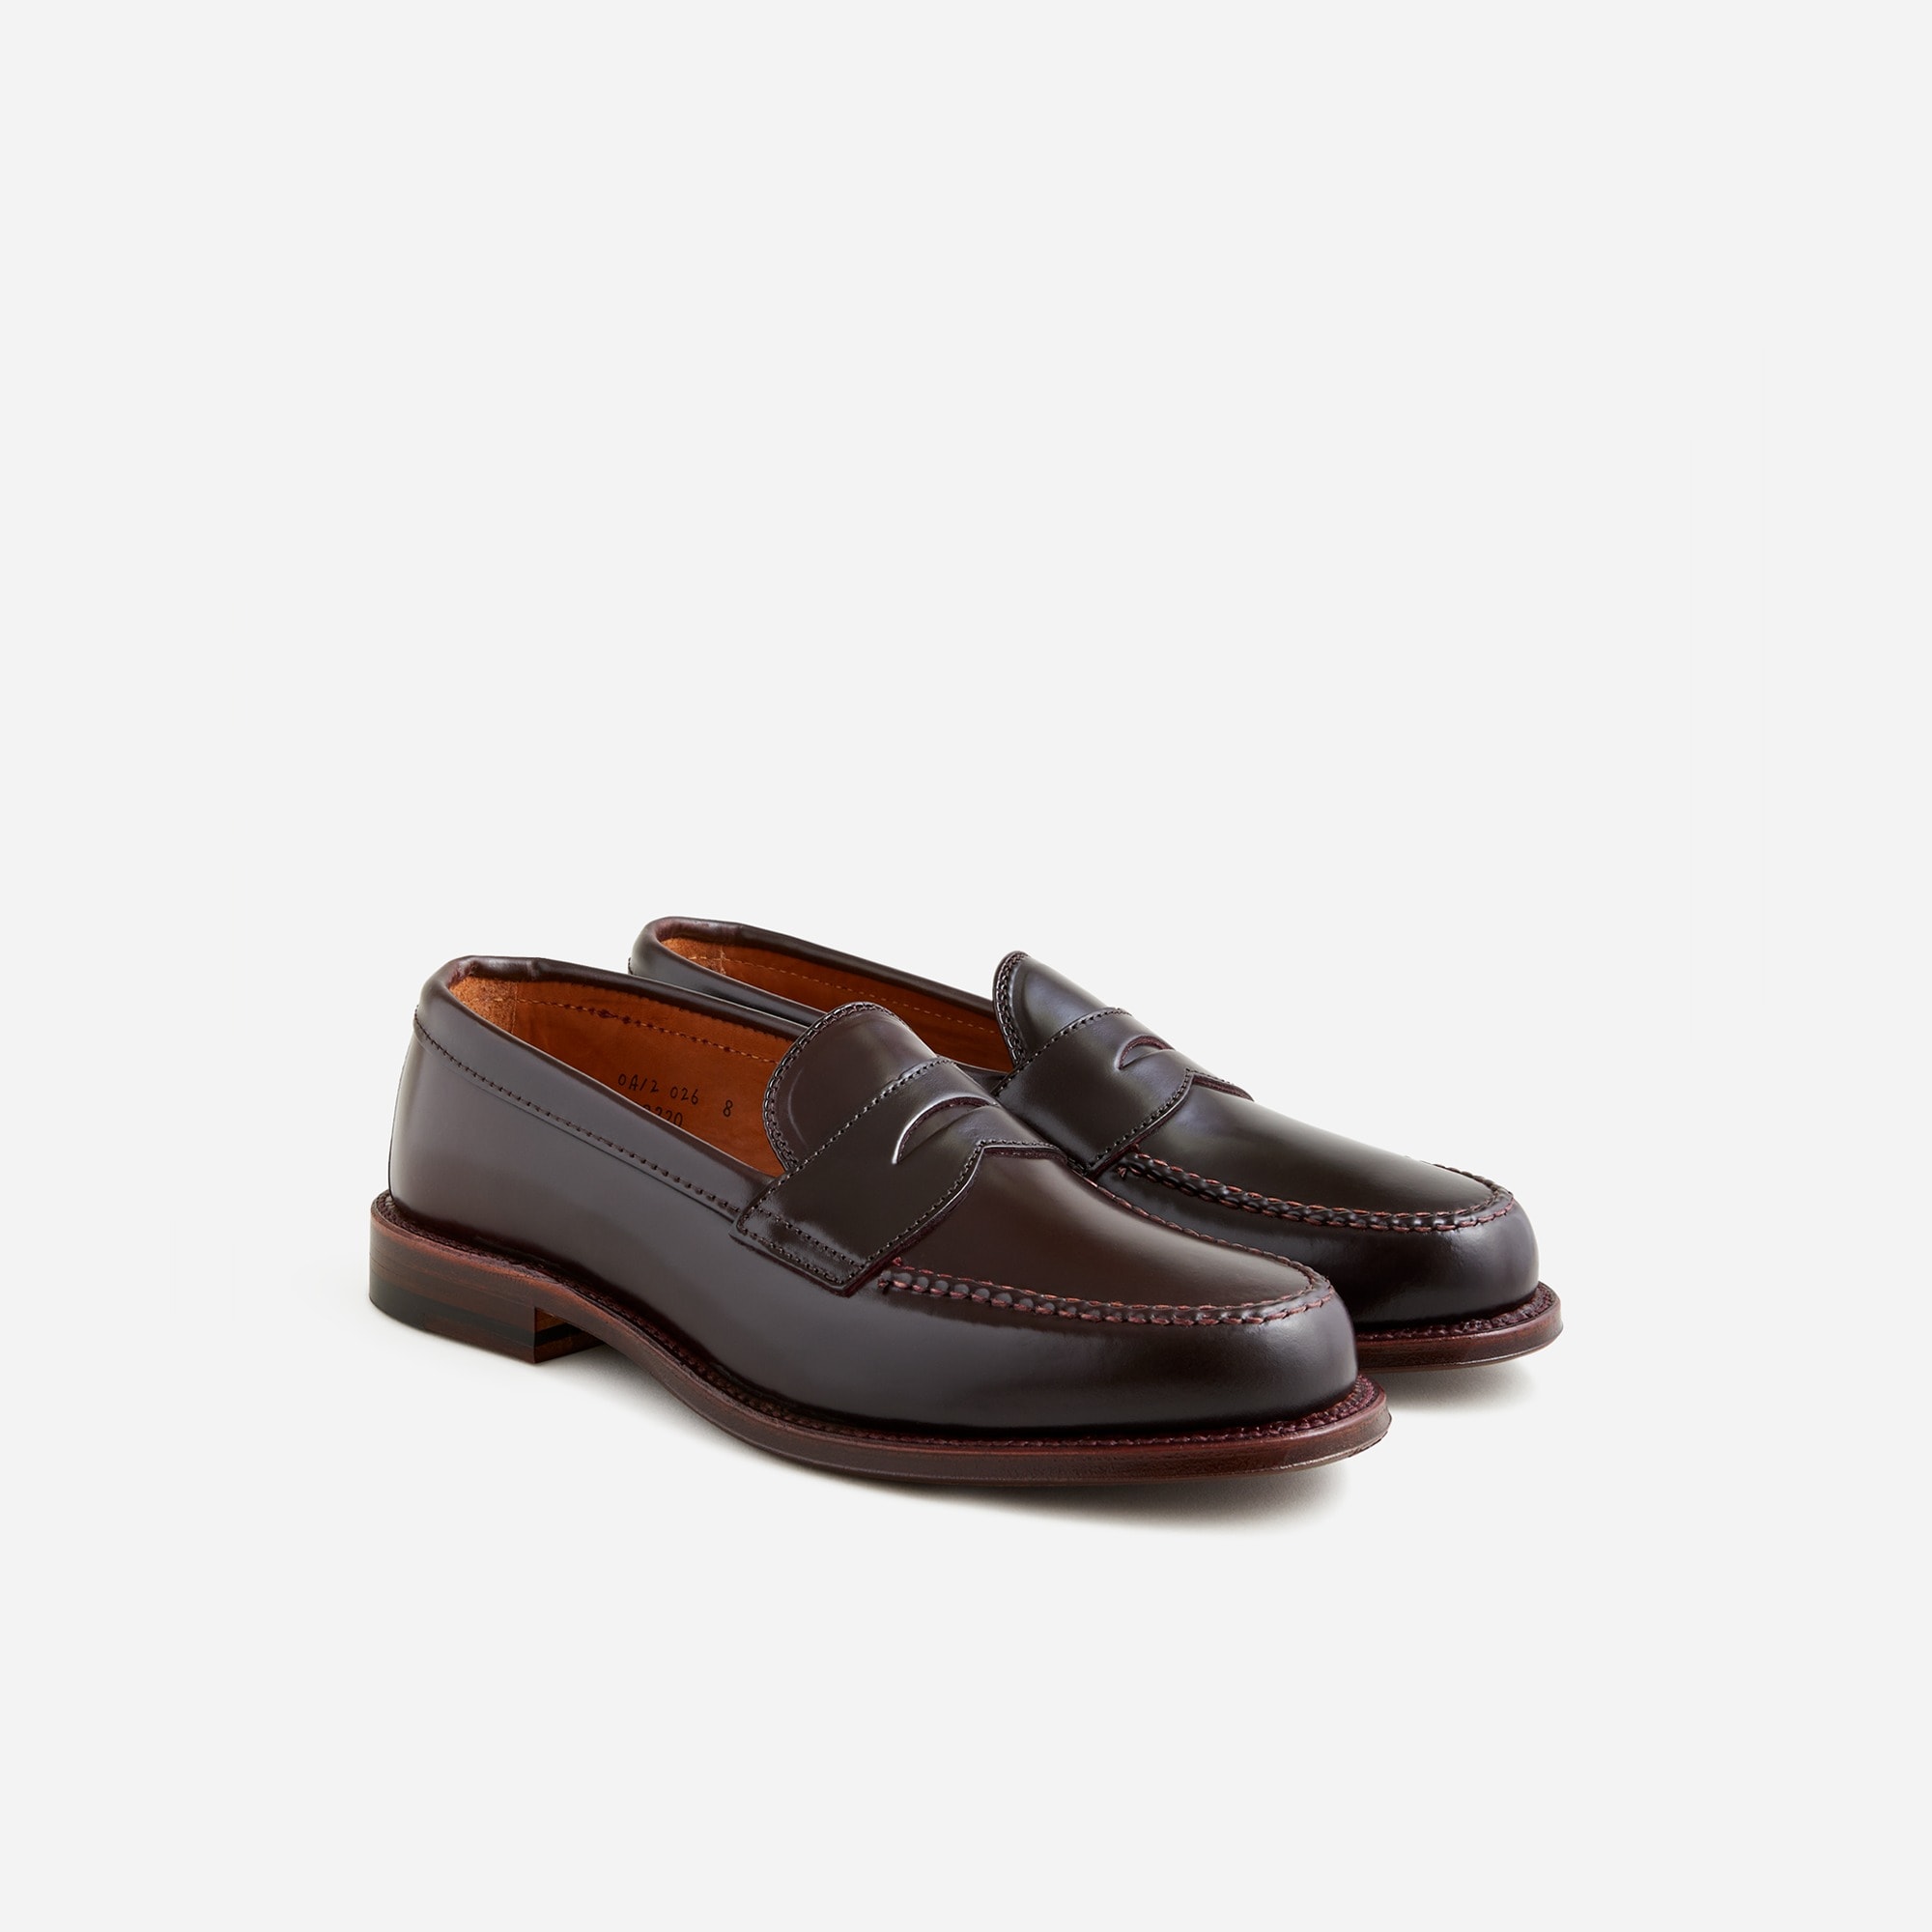  Alden® for J.Crew cordovan penny loafers